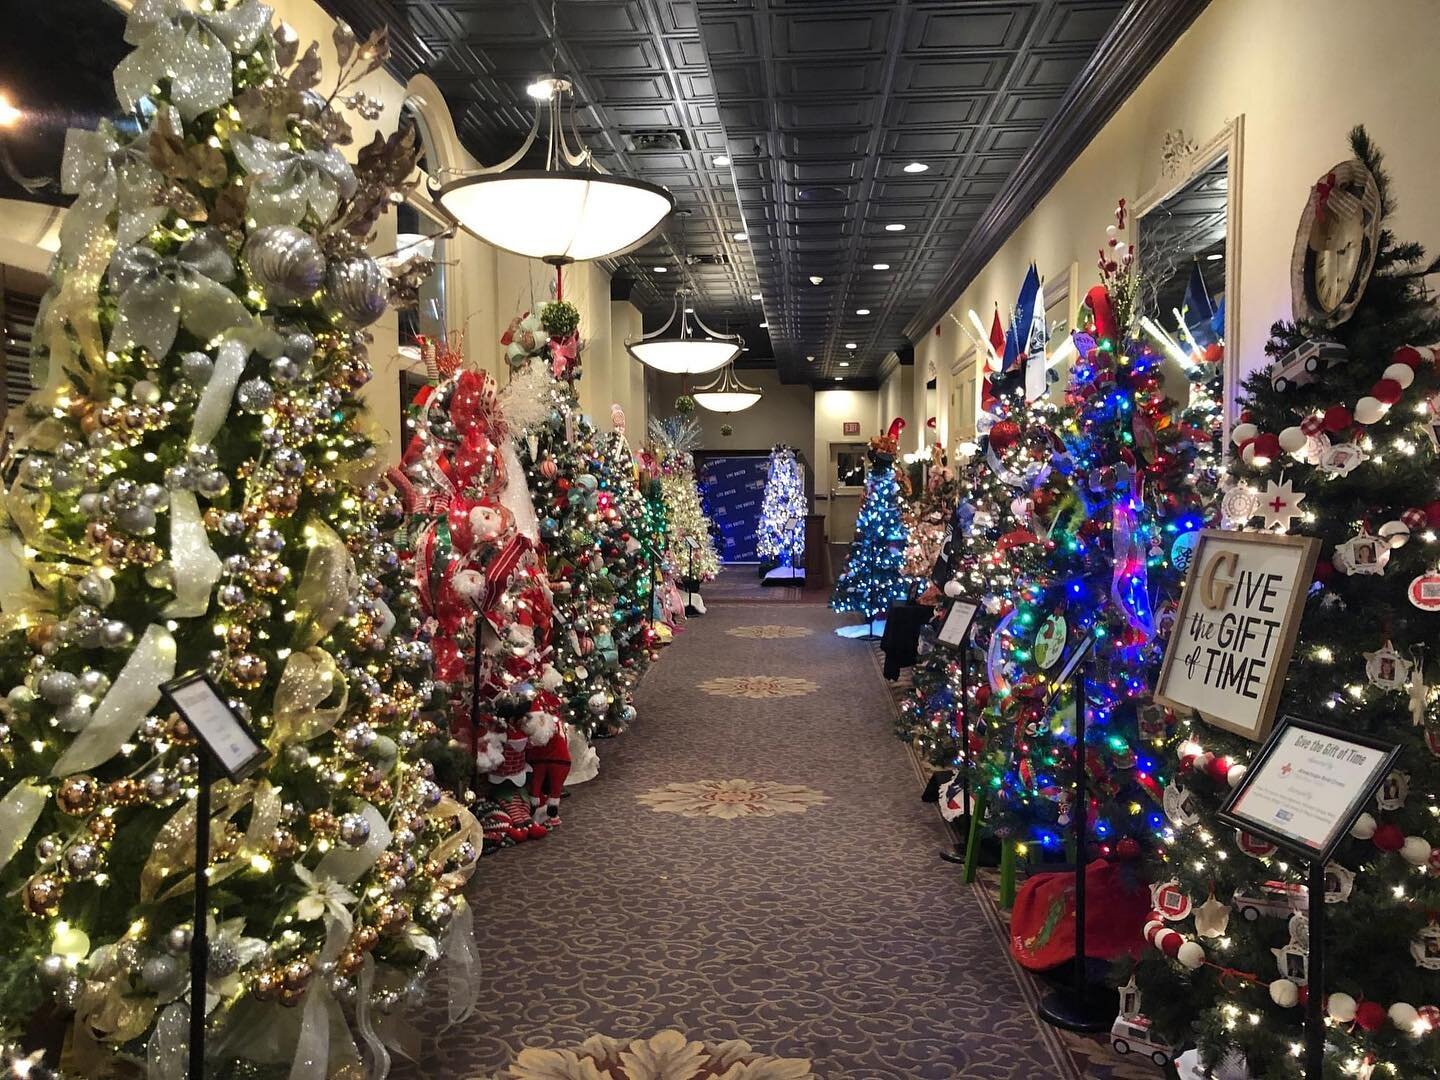 🎄 Calling all Christmas Lovers and Tree Decorators! 🎄

Registration is now open for the 2022 Festival of Trees! 🤩

Sign up now to sponsor a tree on behalf of your business or organization or decorate your very own tree! 

Register at uwamov.com/fe